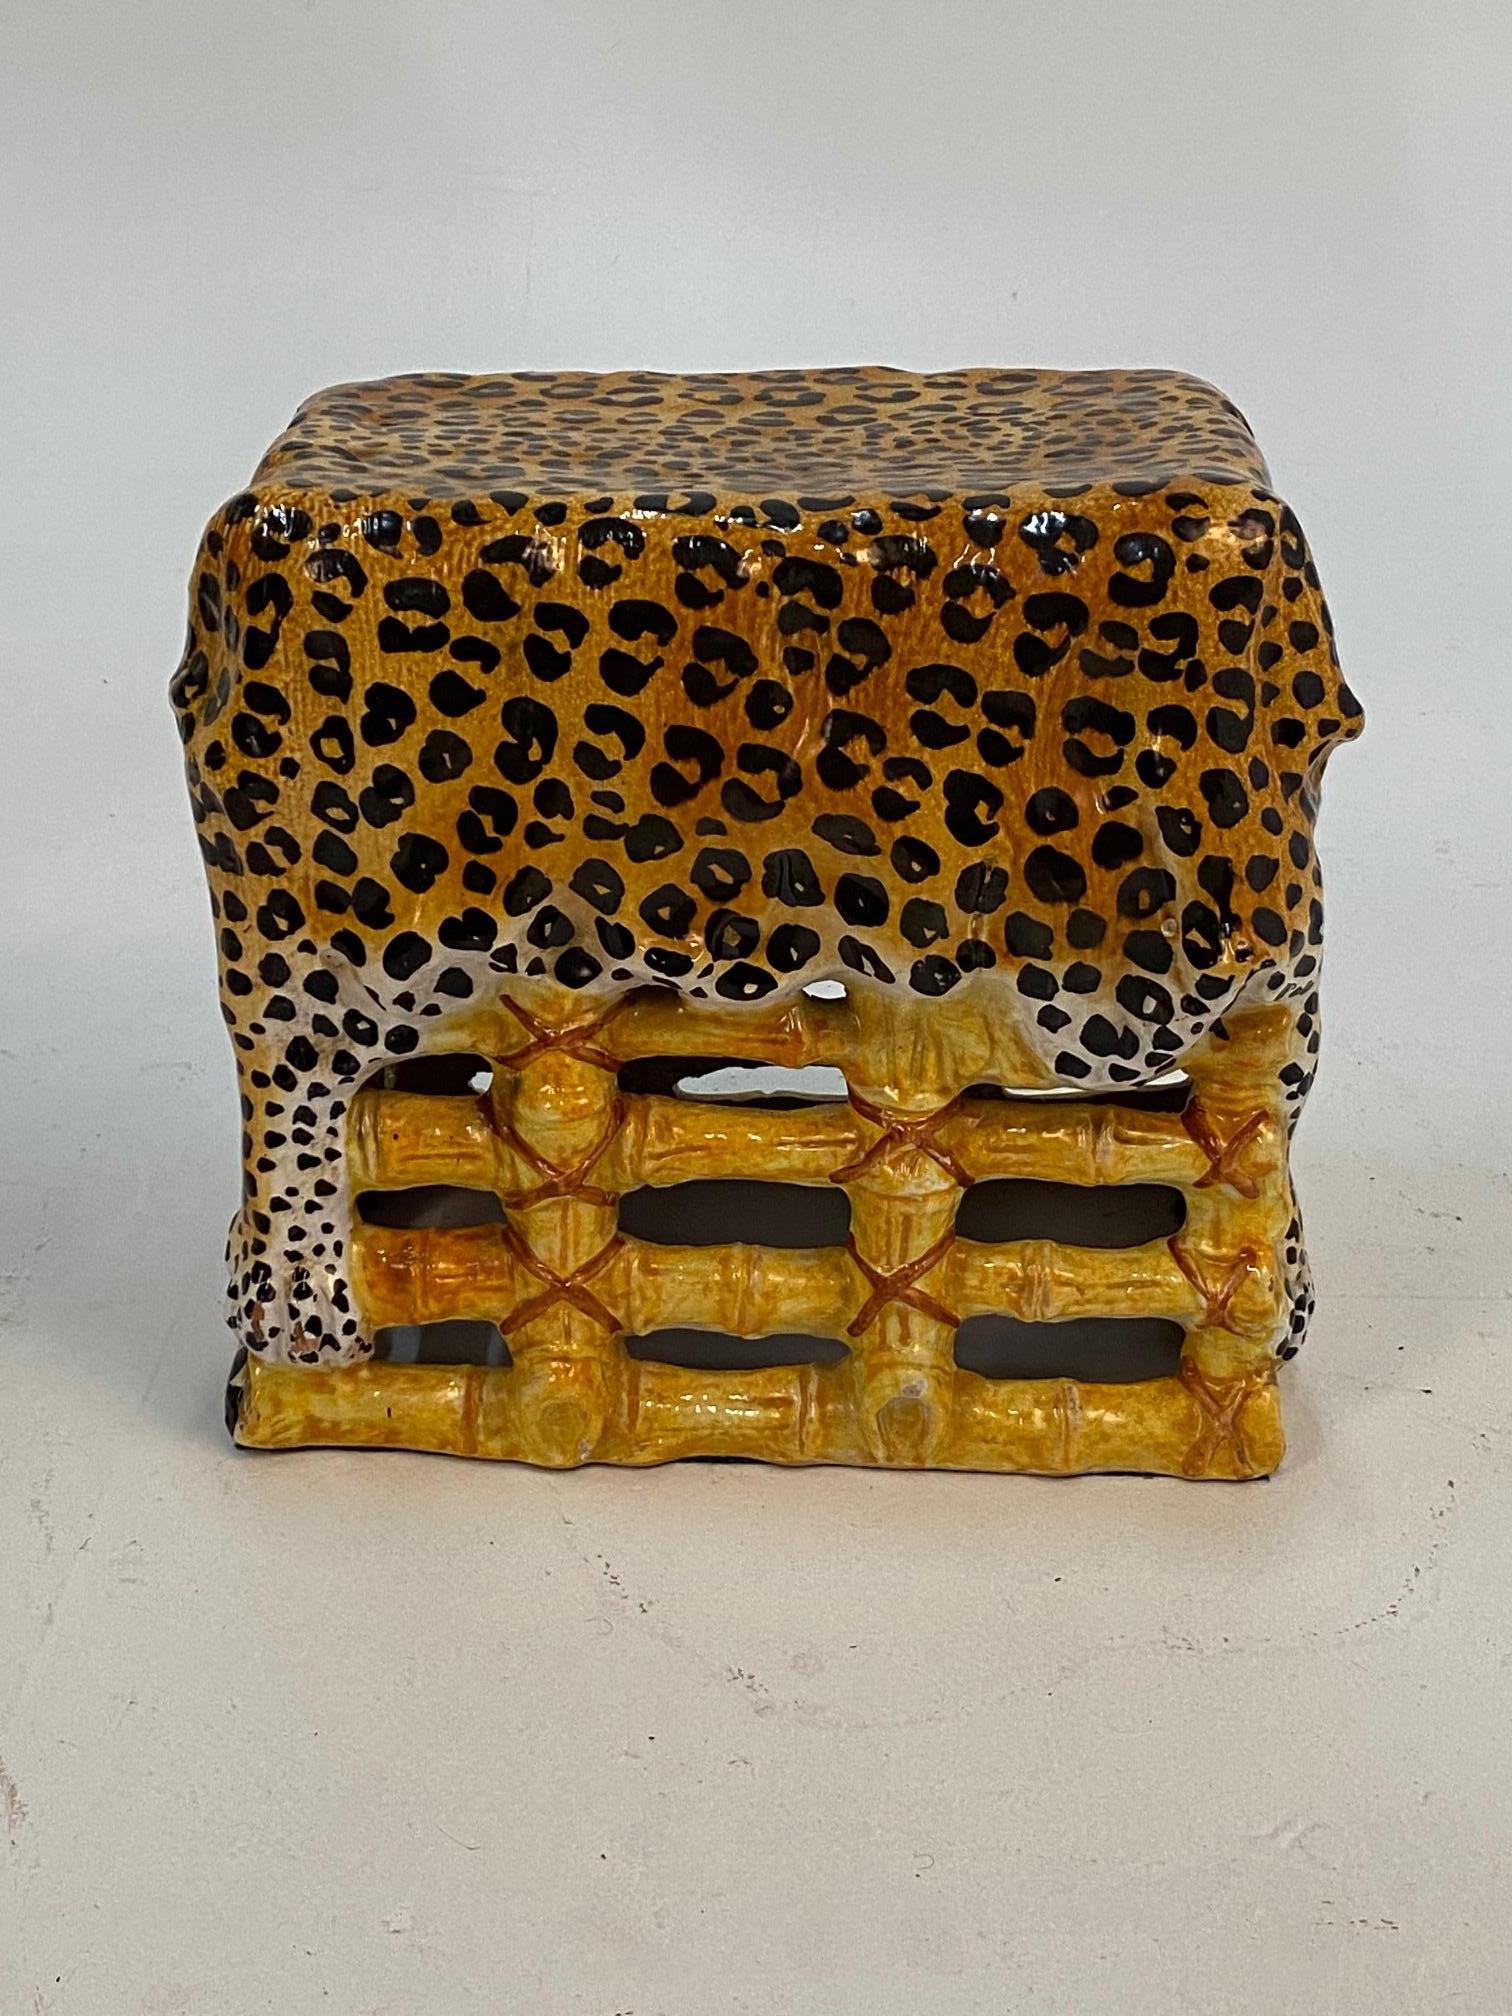 An unusual glamorous form of an Italian terracotta garden seat and table having leopard print draped over bamboo-esque base. Colors are warm gold and black, very striking.